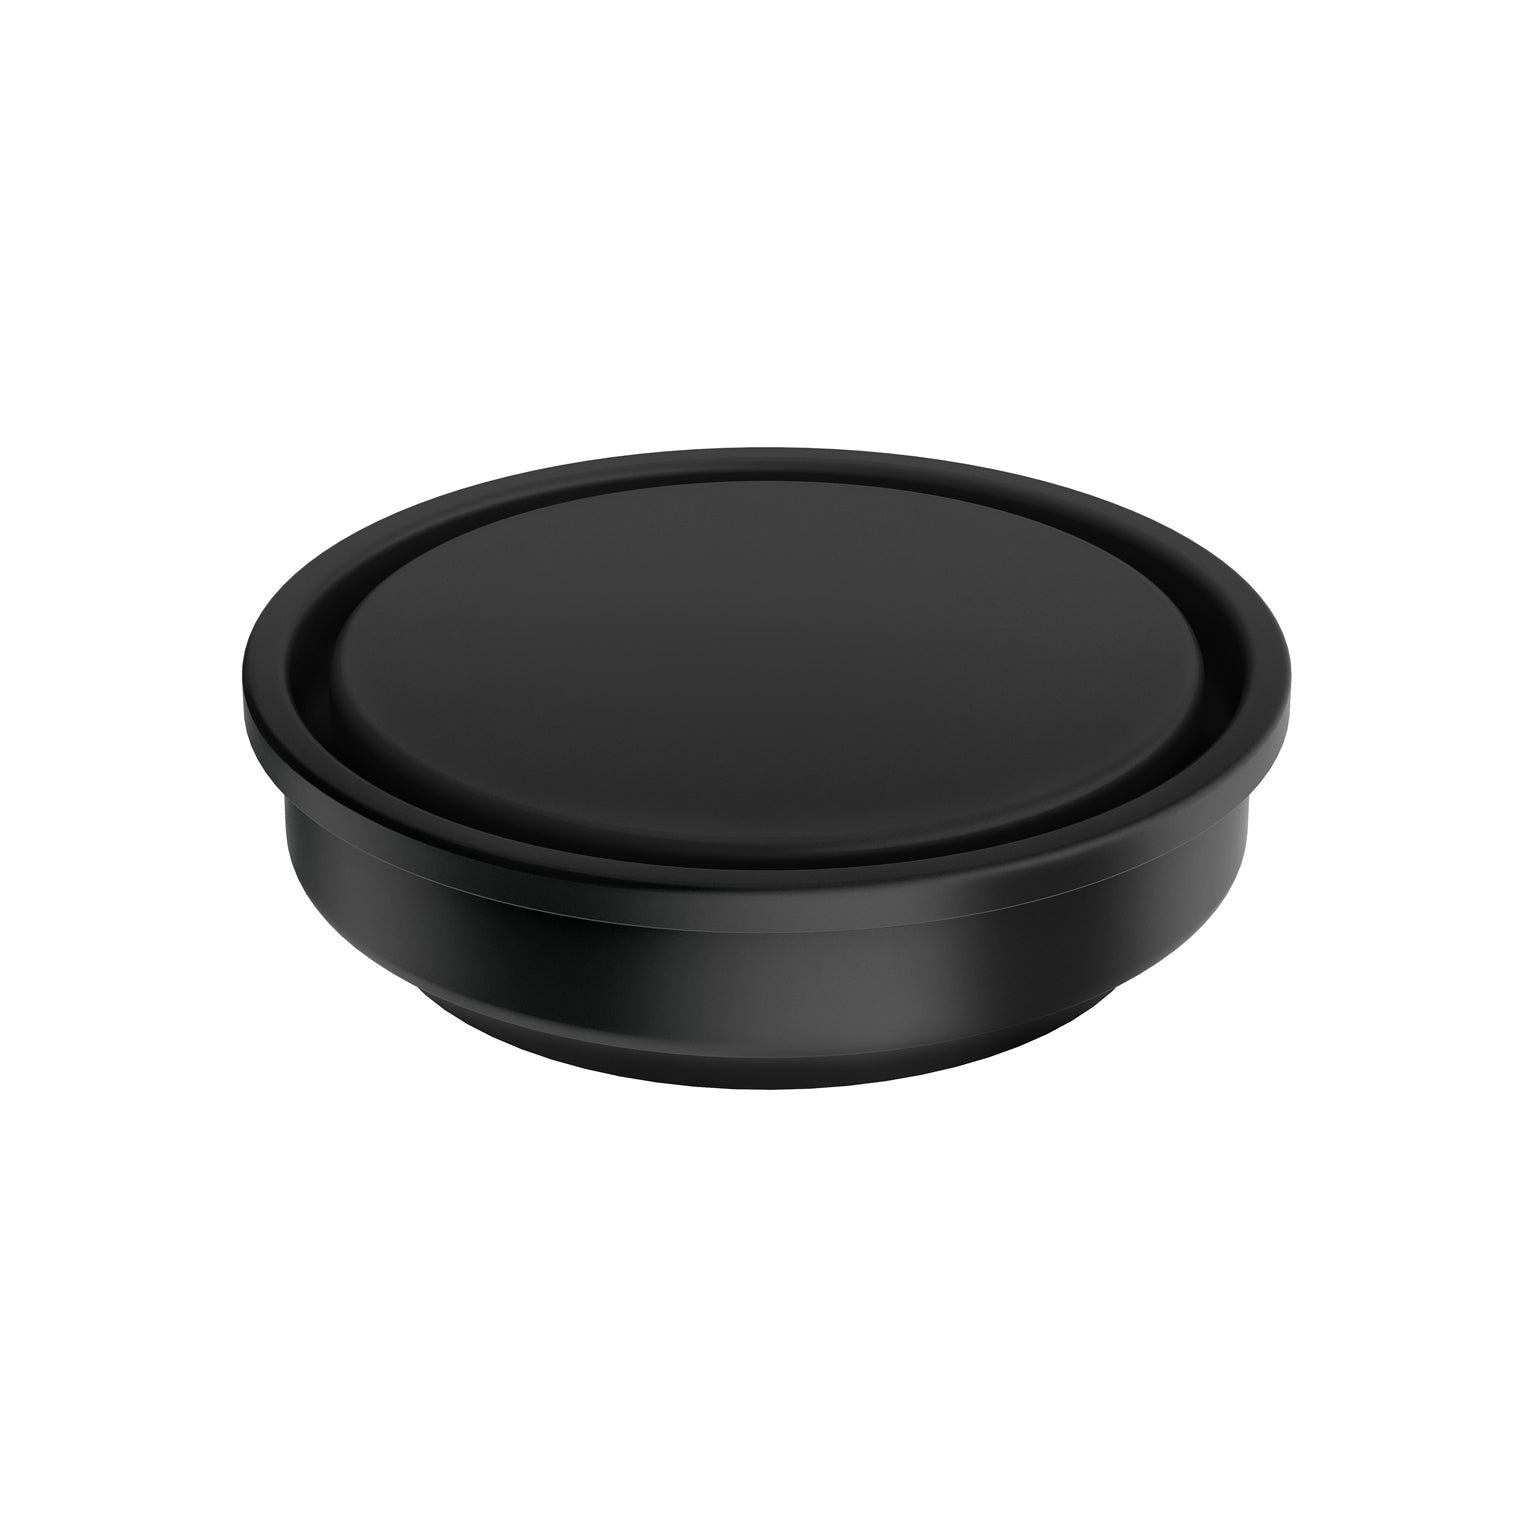 PHOENIX POINT DRAIN ROUND 76MM OUTLET STAINLESS STEEL AND BLACK 100MM